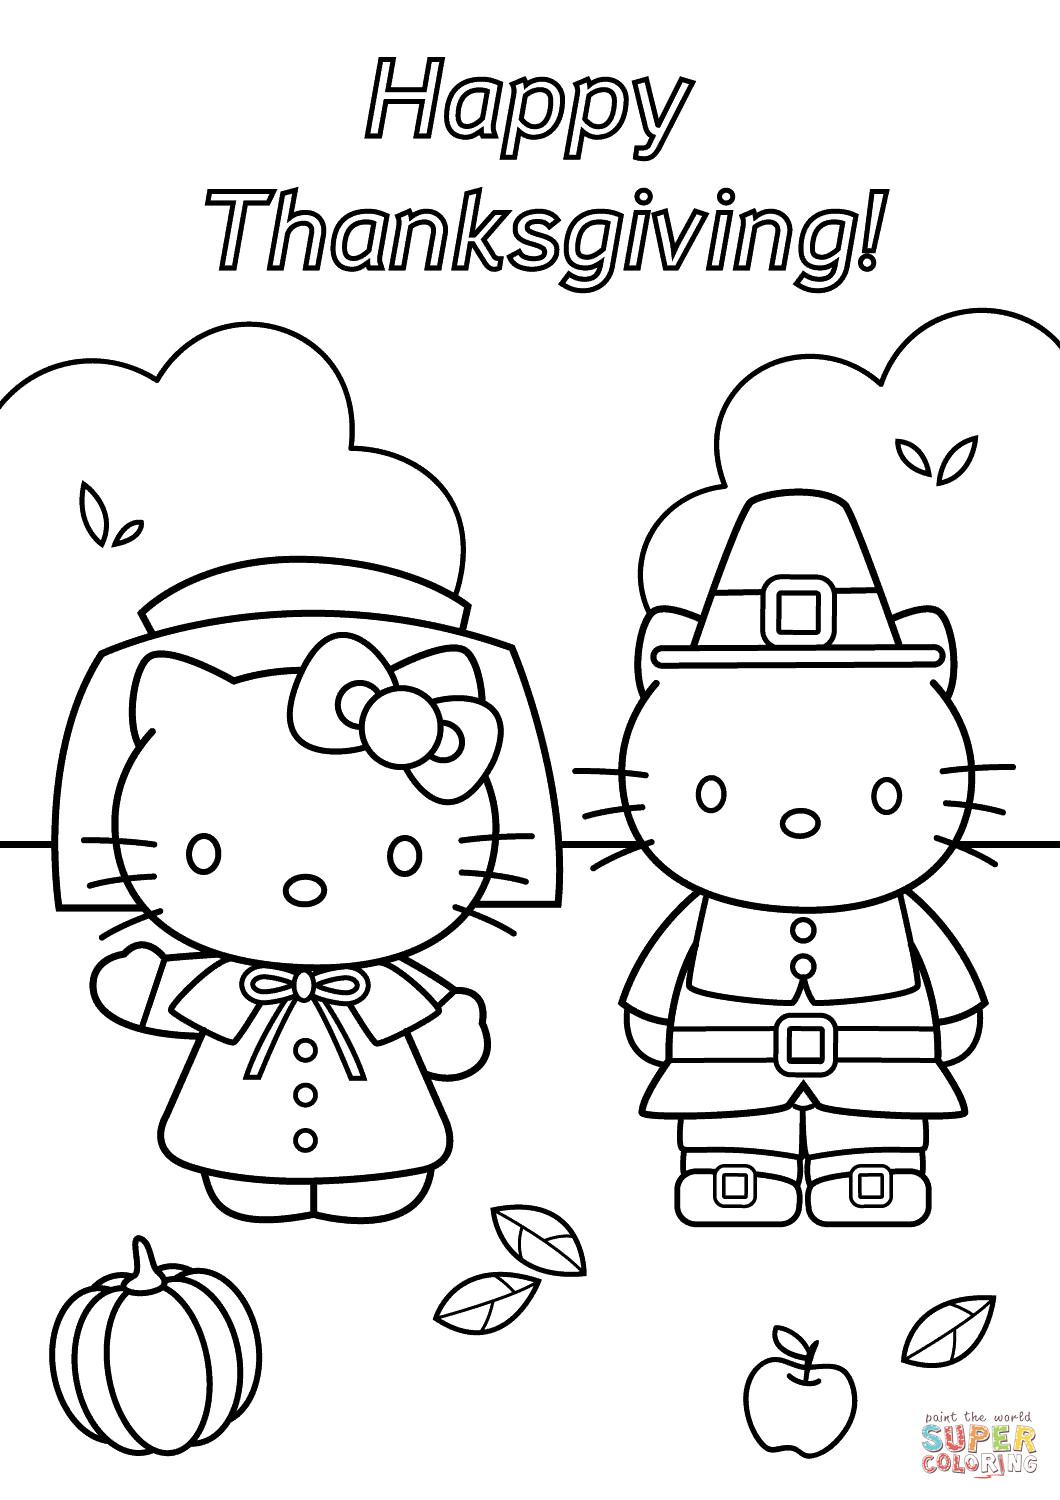 Happy Thanksgiving Coloring Pages For Boys
 Hello Kitty Thanksgiving coloring page